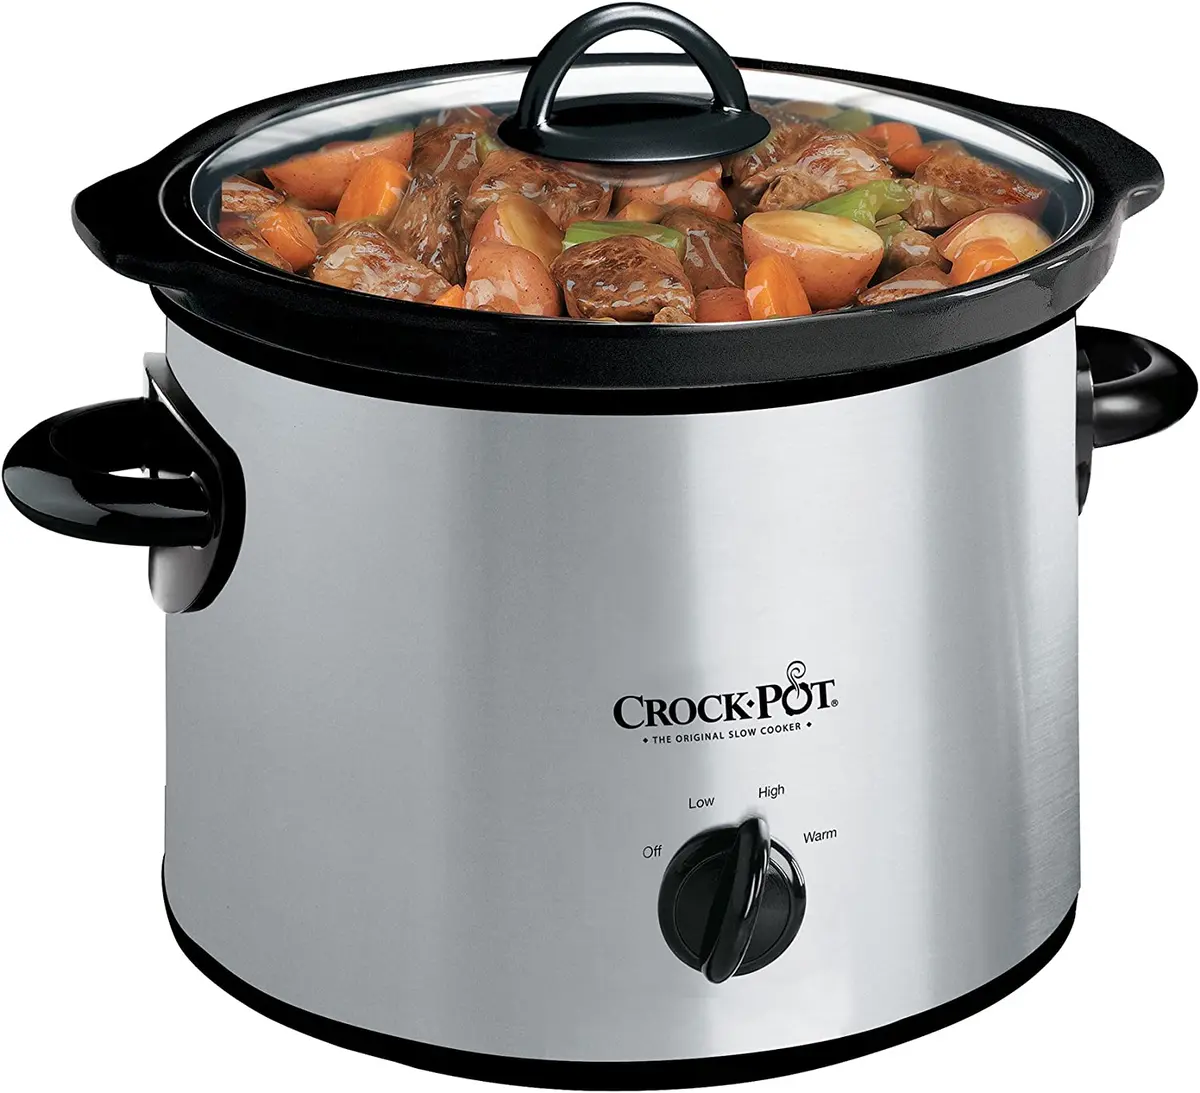 Crock-Pot Small 3 Quart round Manual Slow Cooker, Stainless Steel